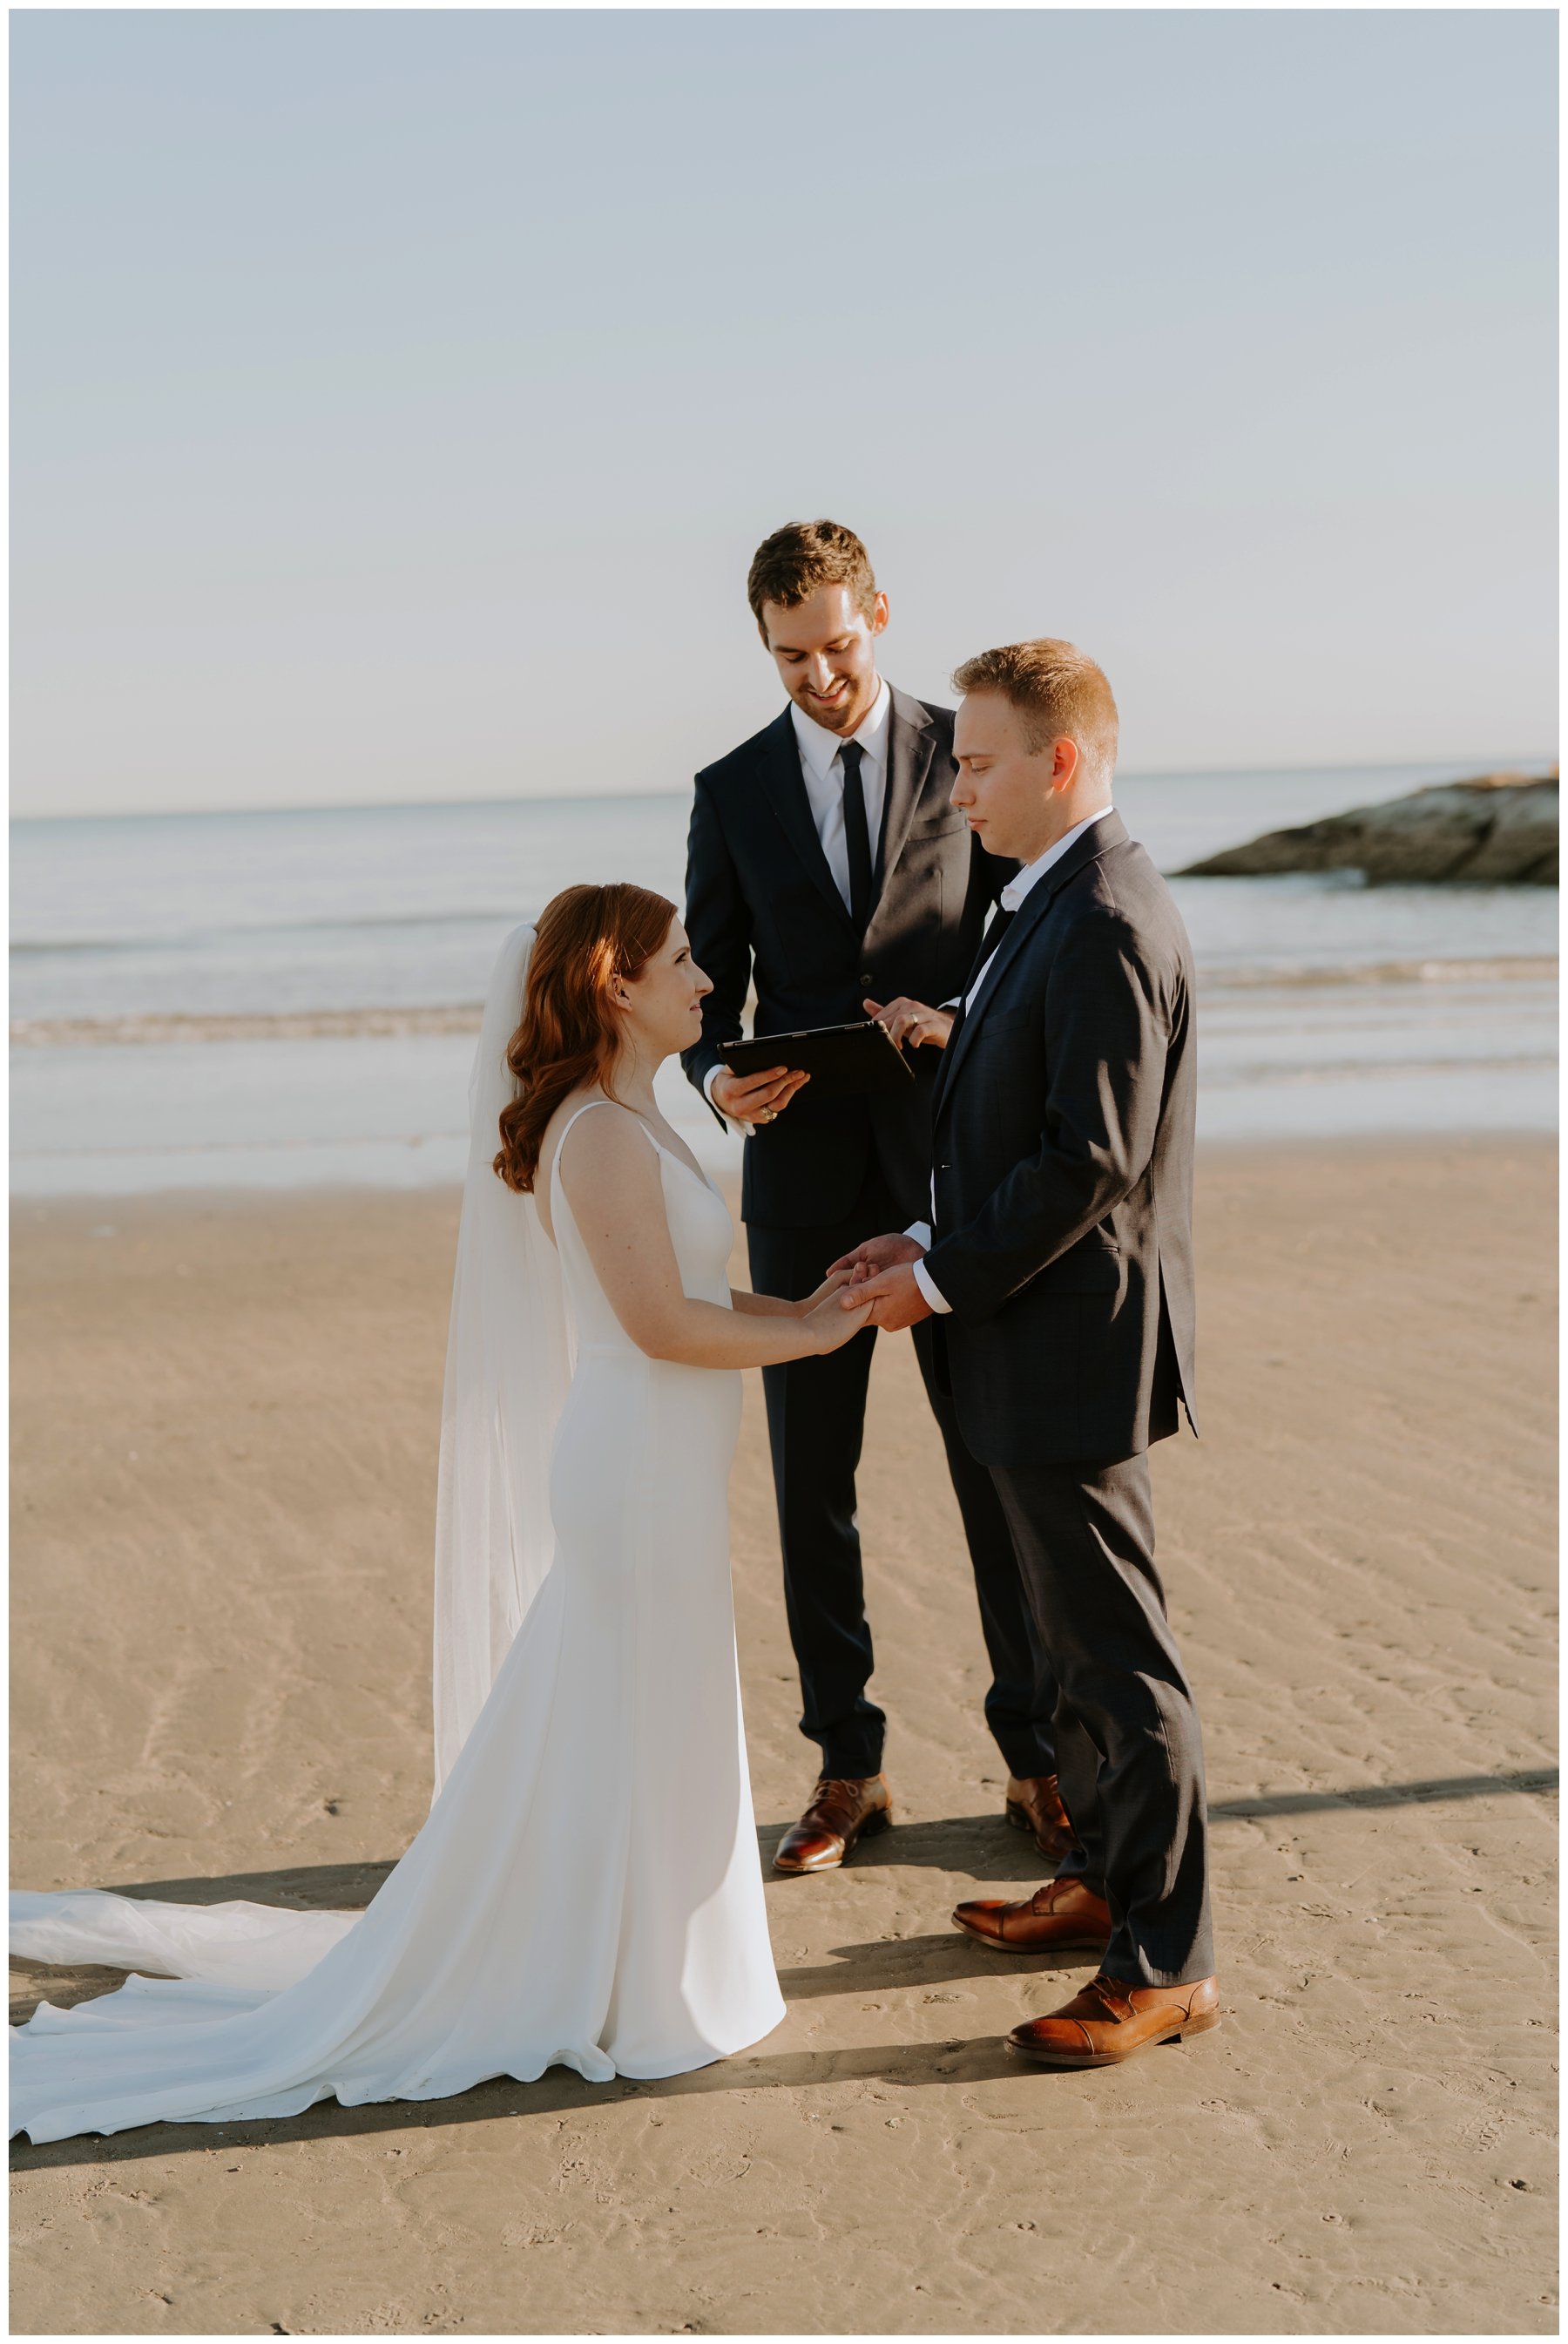 Beach Elopement at Sunset with Officially Oaks | Ashley Medrano Photography | Galveston Texas Beach Elopement | via ashleymedrano.com